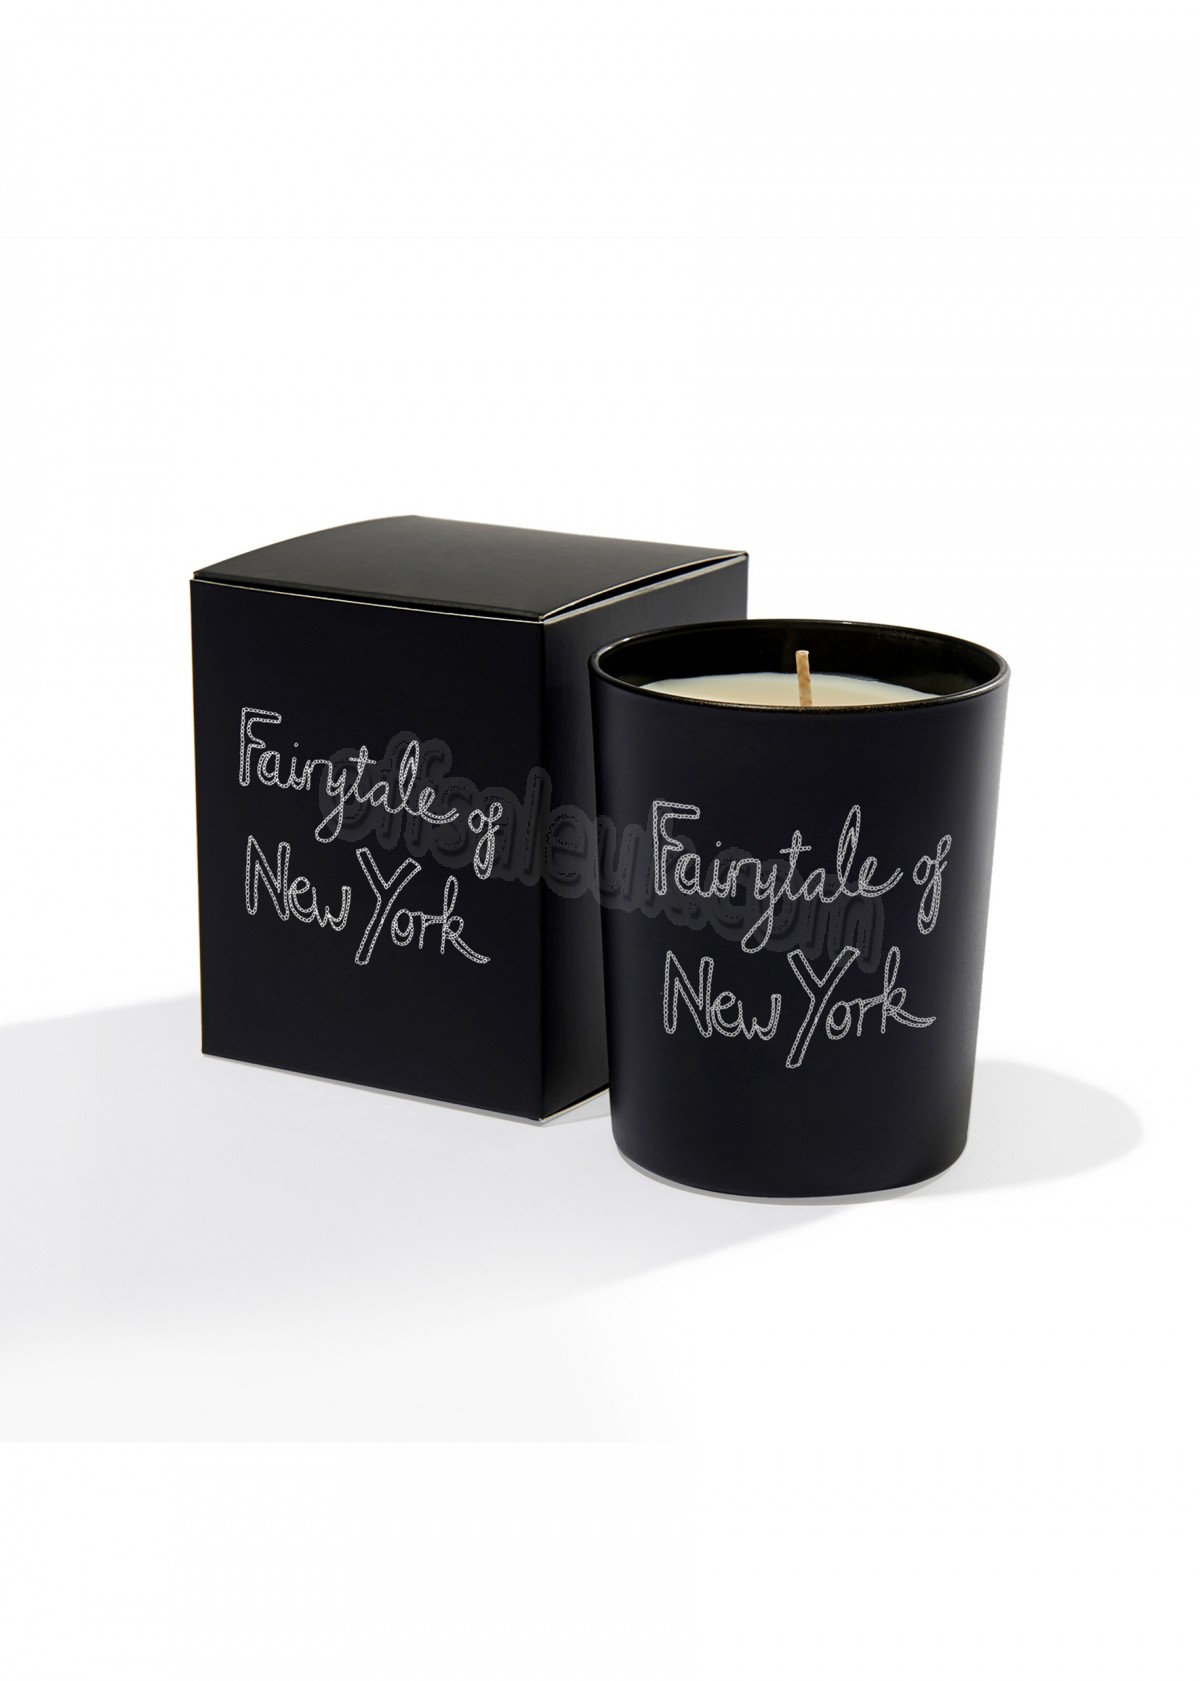 Cheap Fairytale of New York Candle - -1